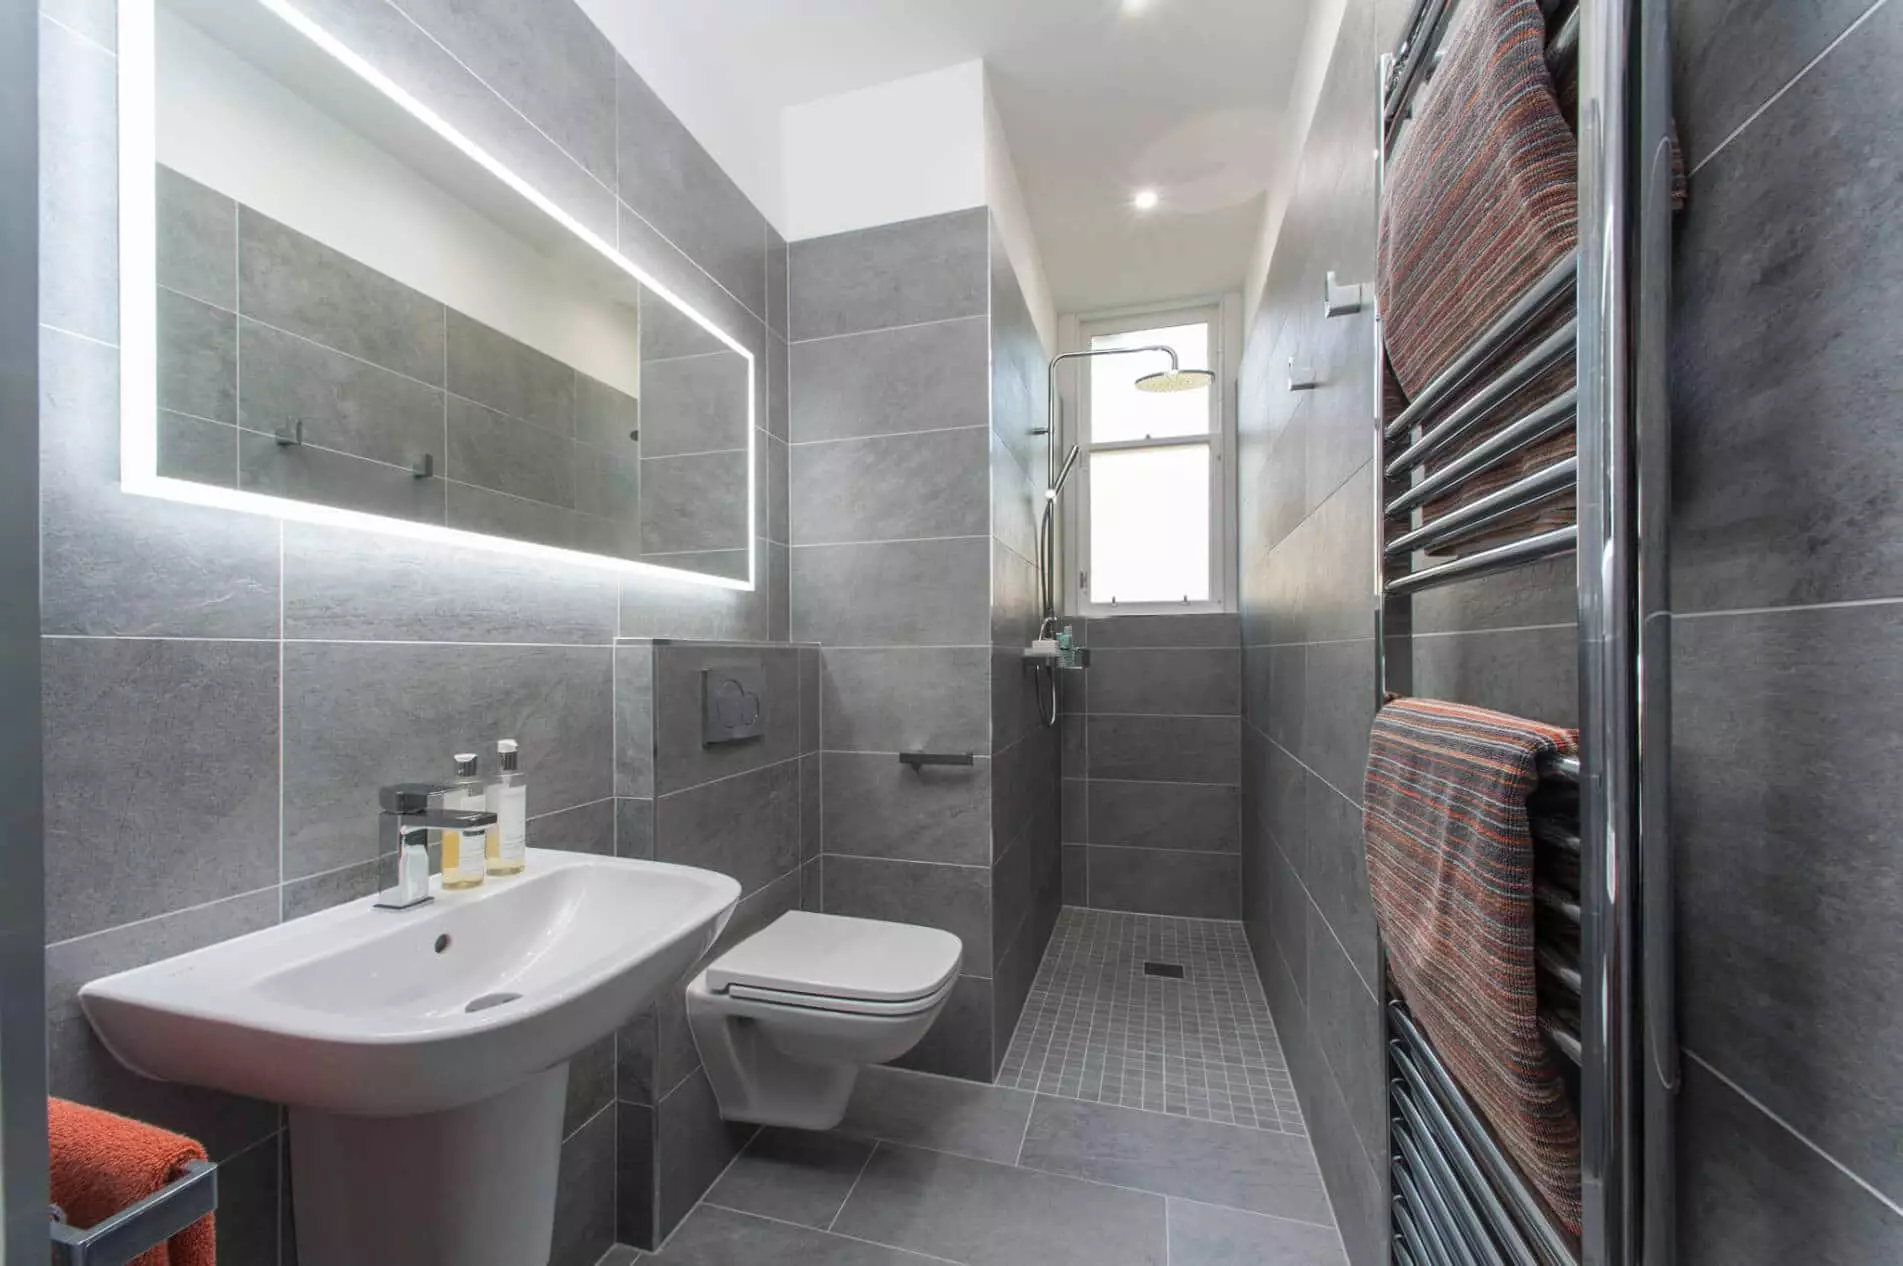 How Much Space Do You Need Between A Shower And Toilet?